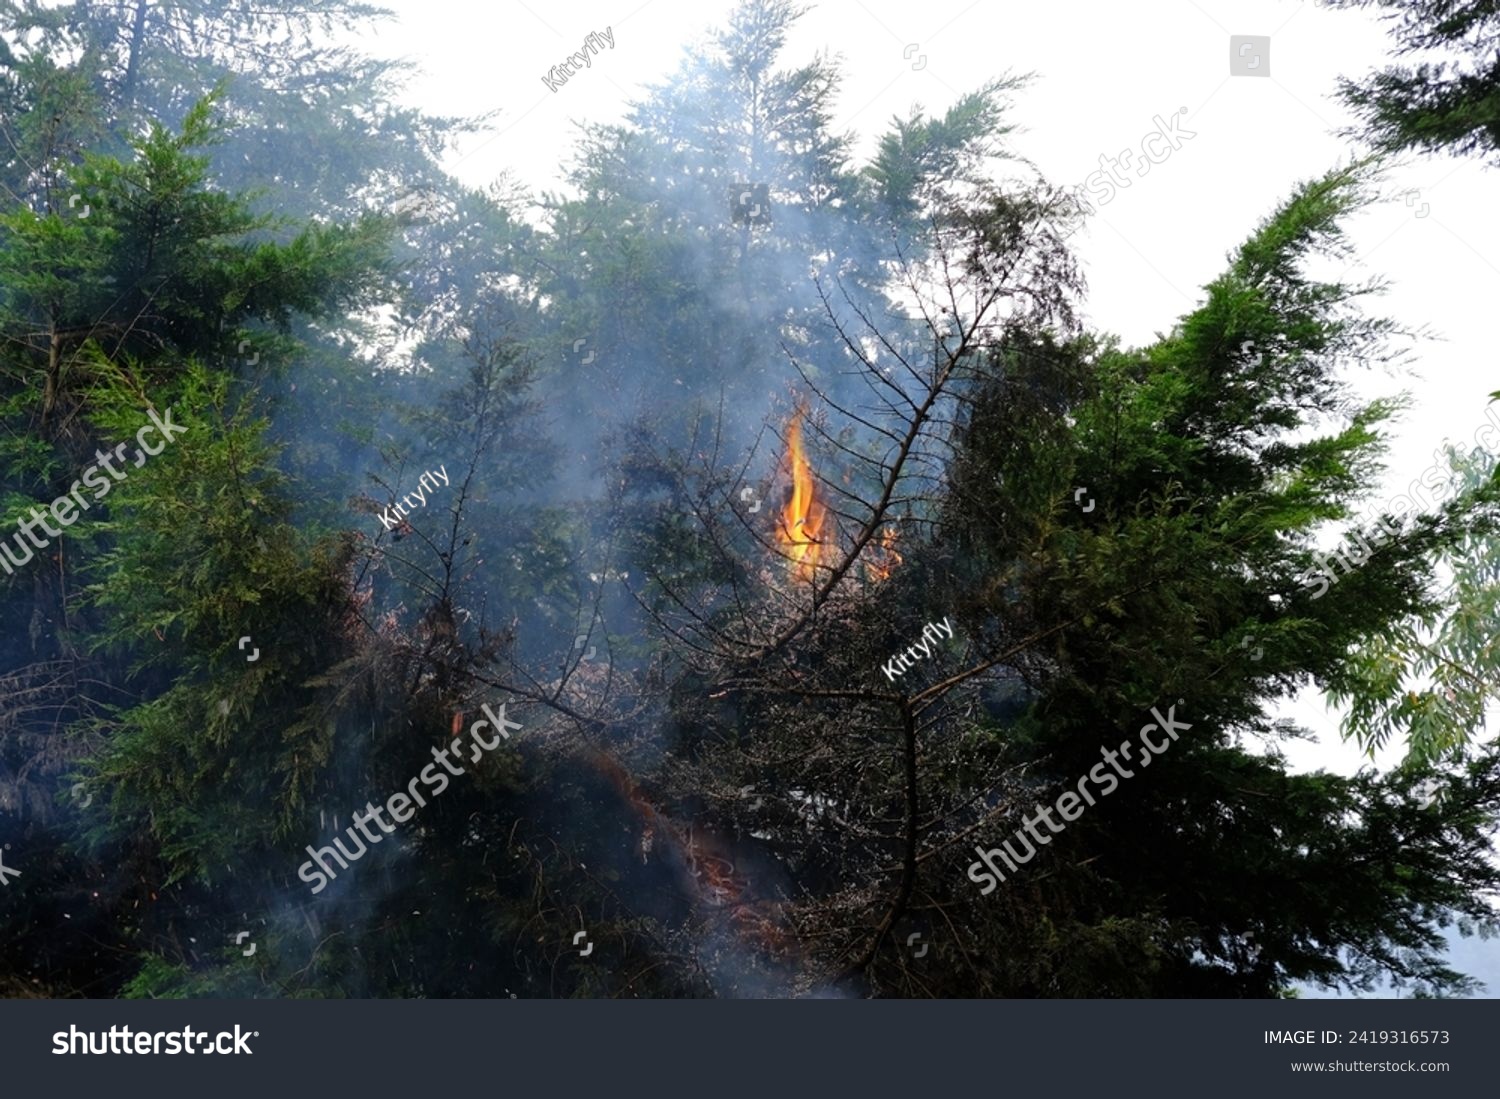 crown fire, green tree on flames, branches enveloping gray smoke, natural forest fire, rampant elements, danger setting fire to dry grass, harming nature, uncontrolled burning, spontaneous spread #2419316573